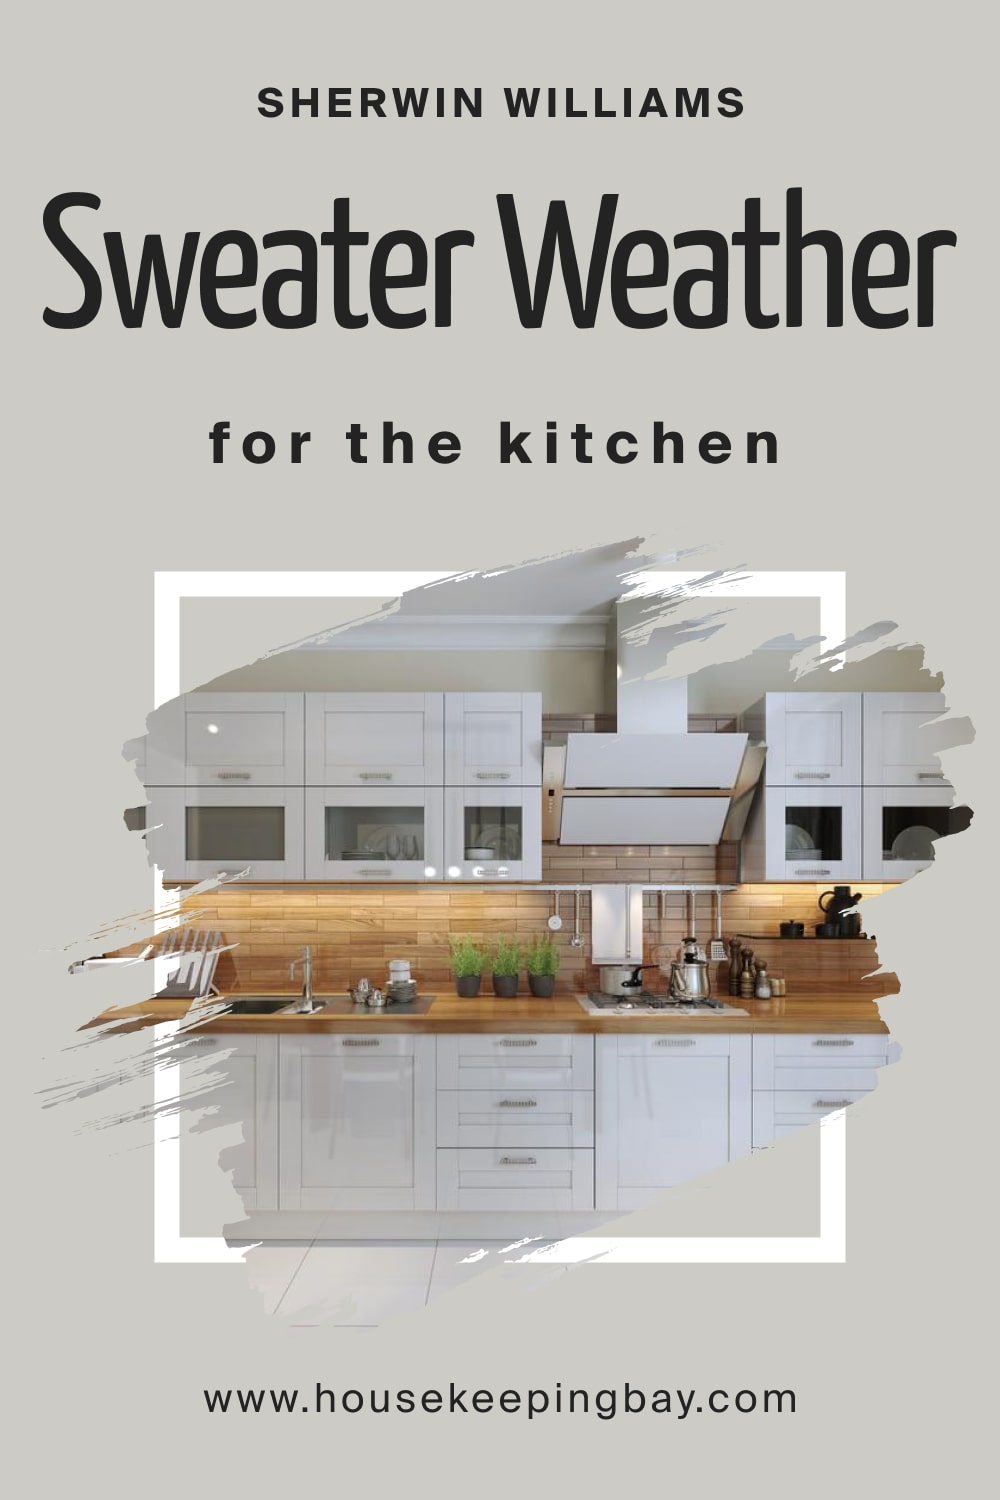 Sherwin Williams. Sweater Weather SW 9548 For the Kitchen